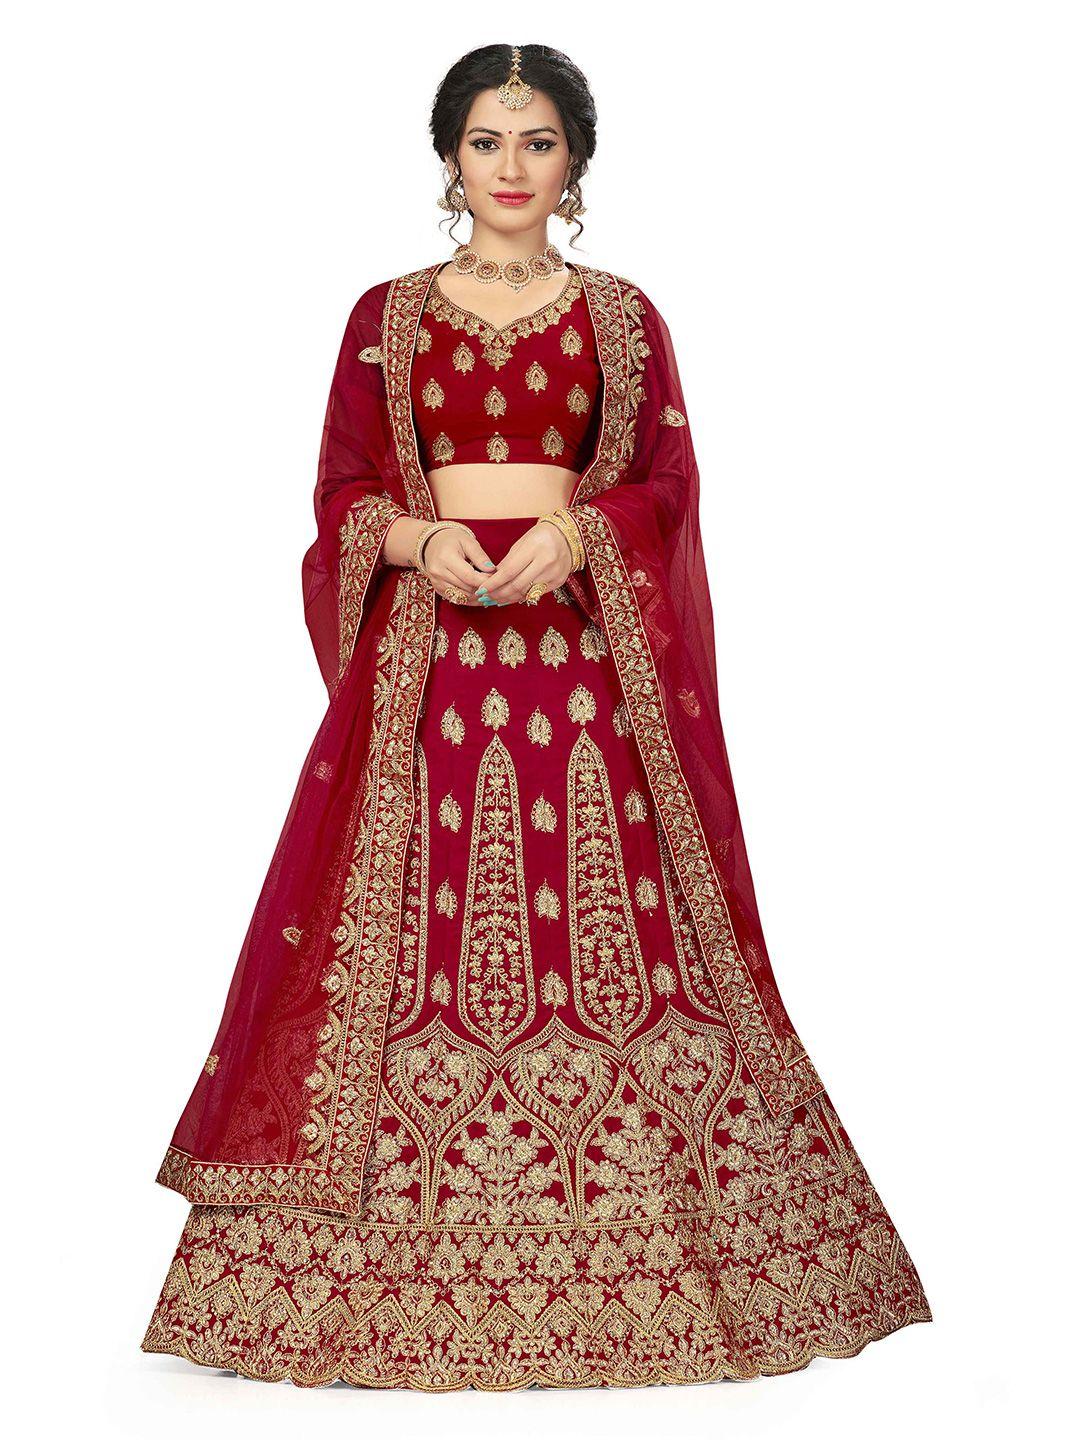 manvaa embroidered thread work semi-stitched lehenga & unstitched blouse with dupatta